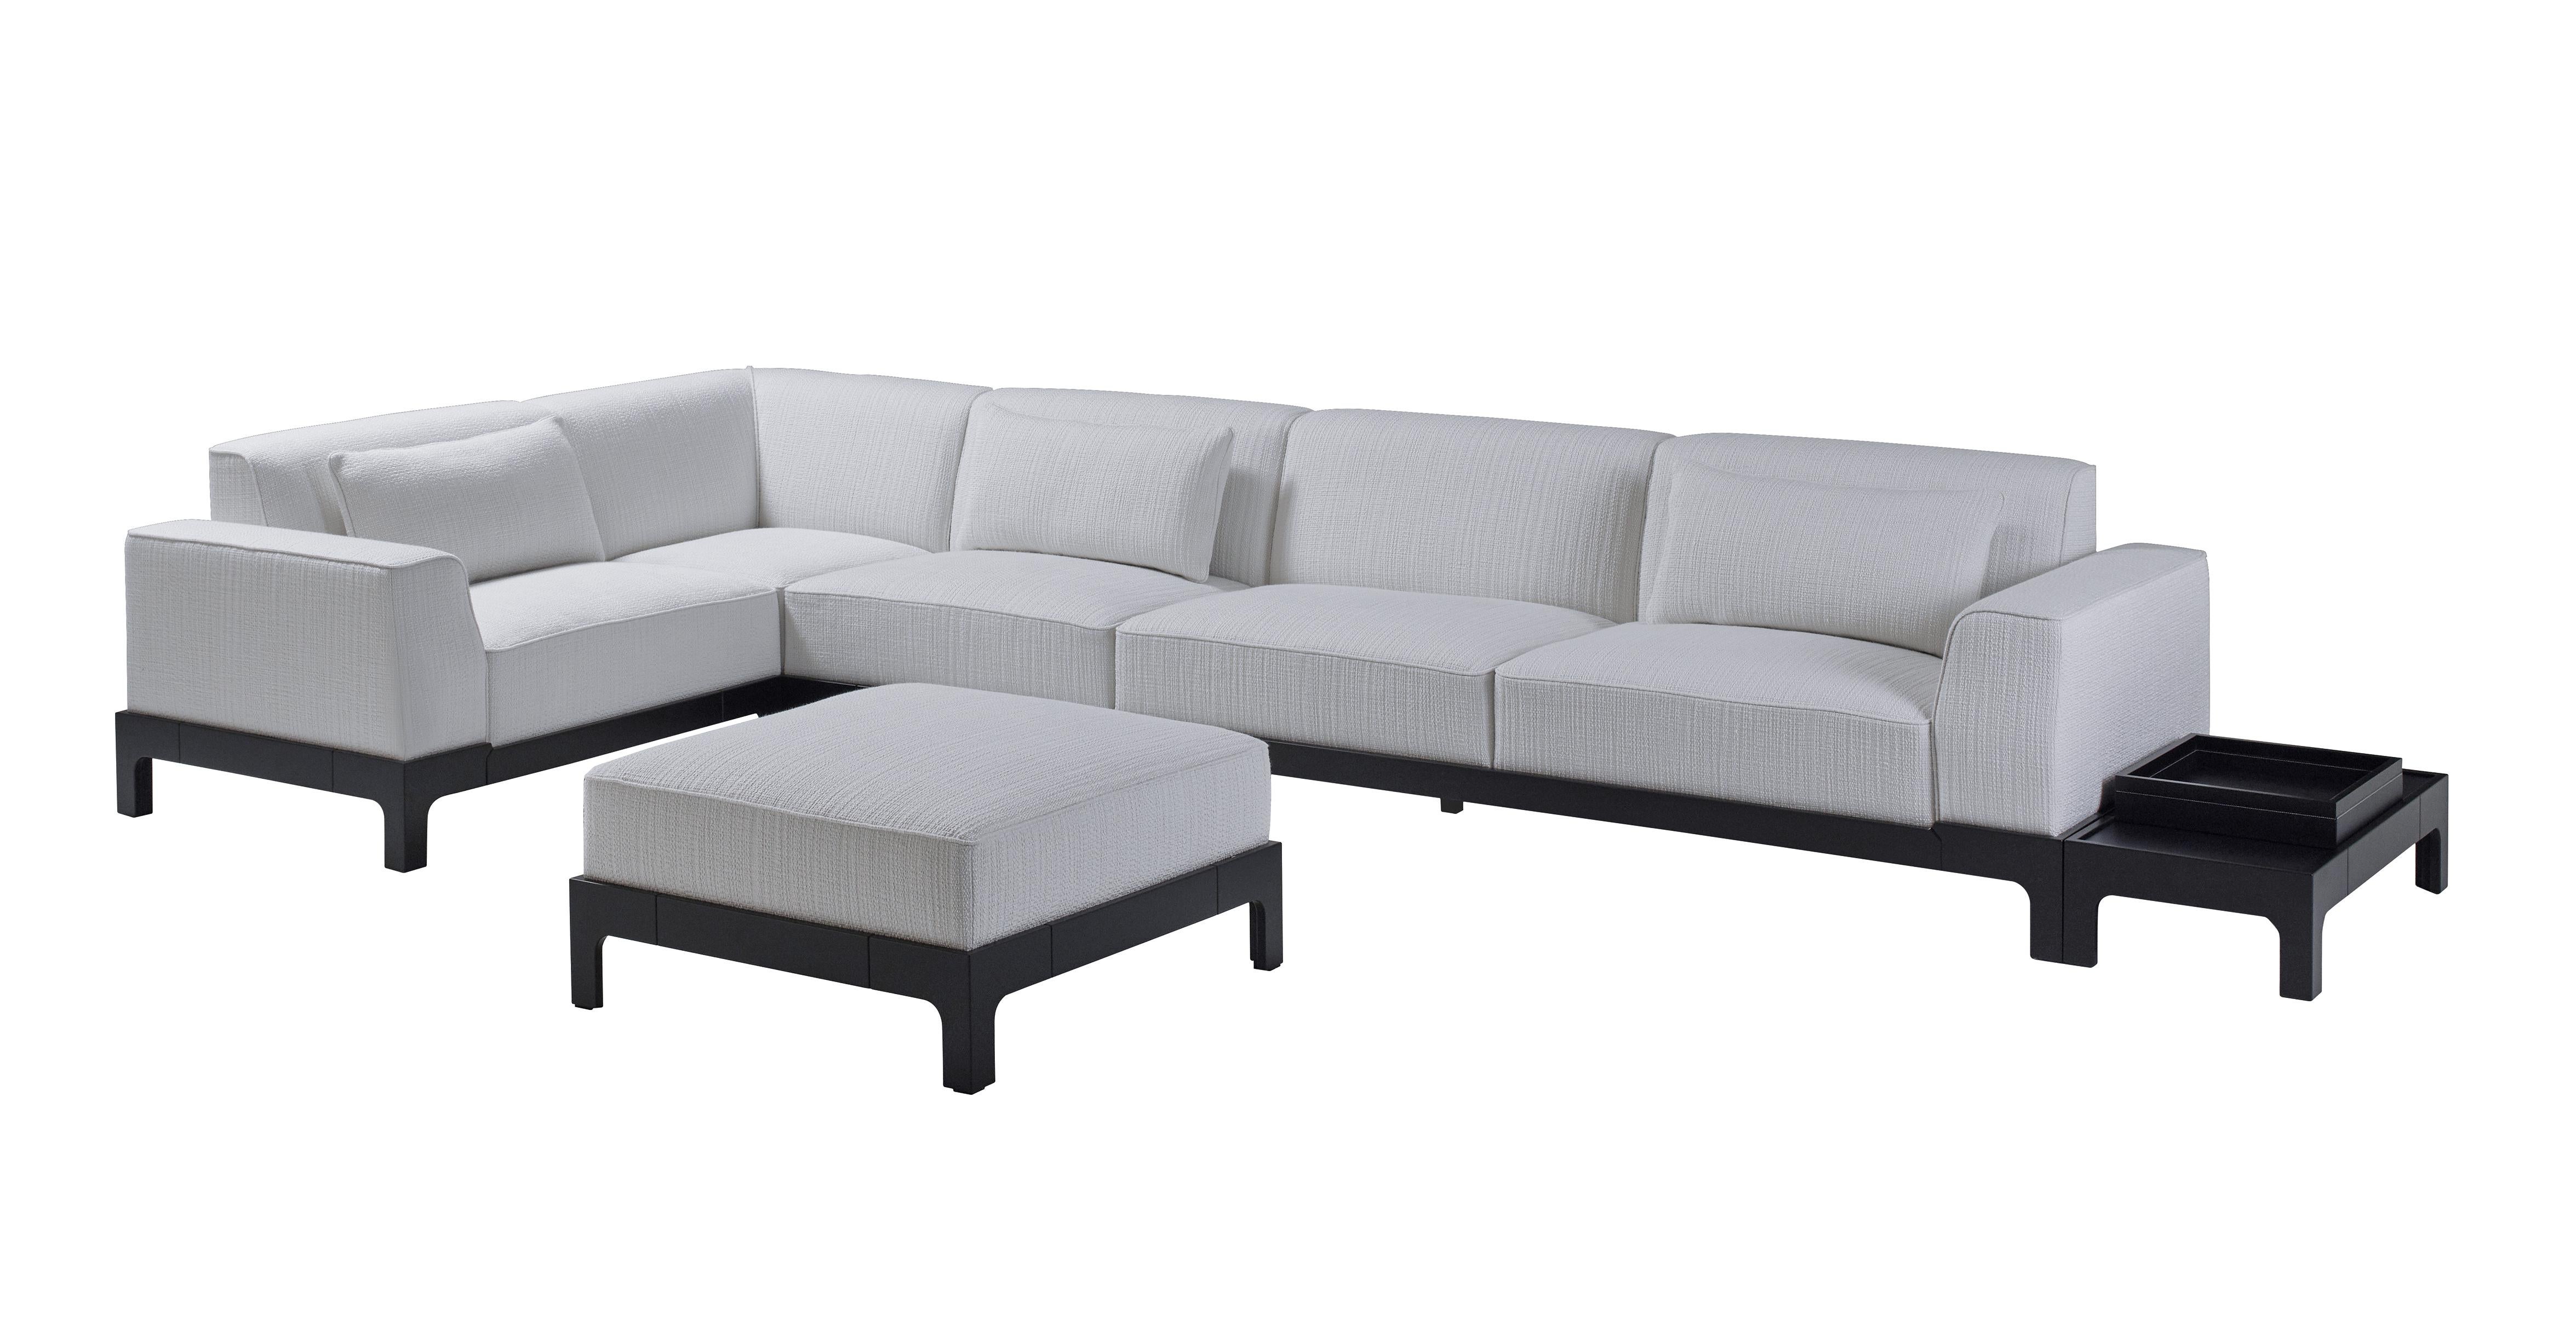 Pullman is a Classic-shaped sofa with a stained blue beech base and a non-removable fabric lining. The cushions are in fabric. The sofa is available also linear. The pouf and the small table complete the design of the Pullman sofa.
            